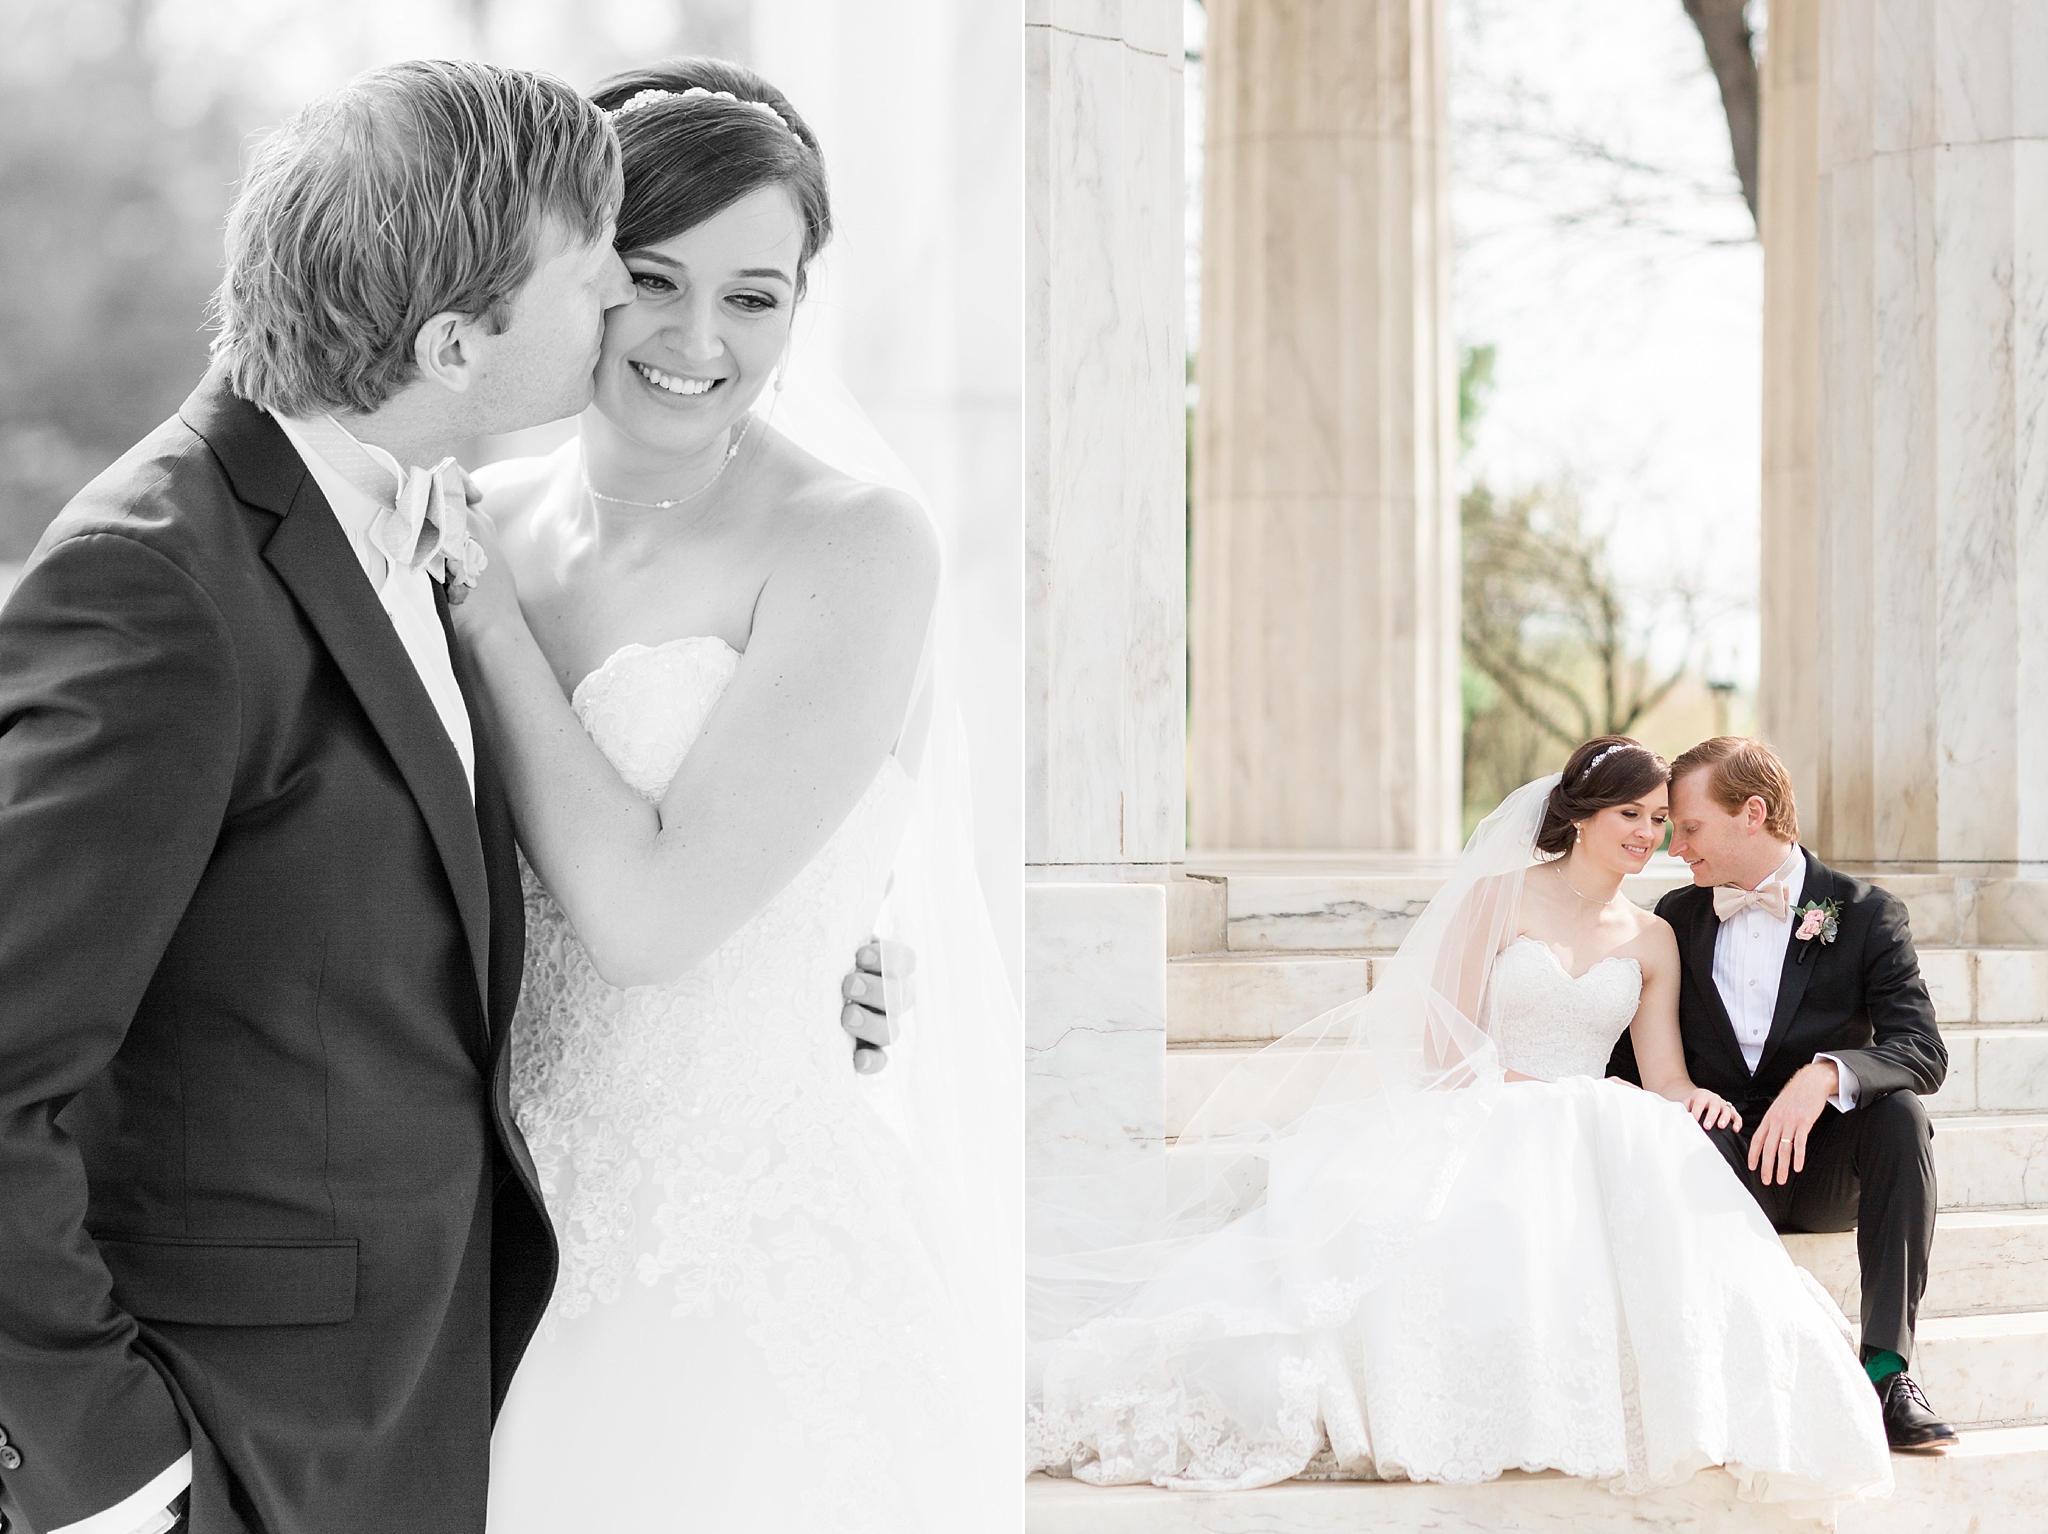 This elegant Chevy Chase Club wedding features stunning portraits at the iconic Lincoln Memorial in Washington, DC.